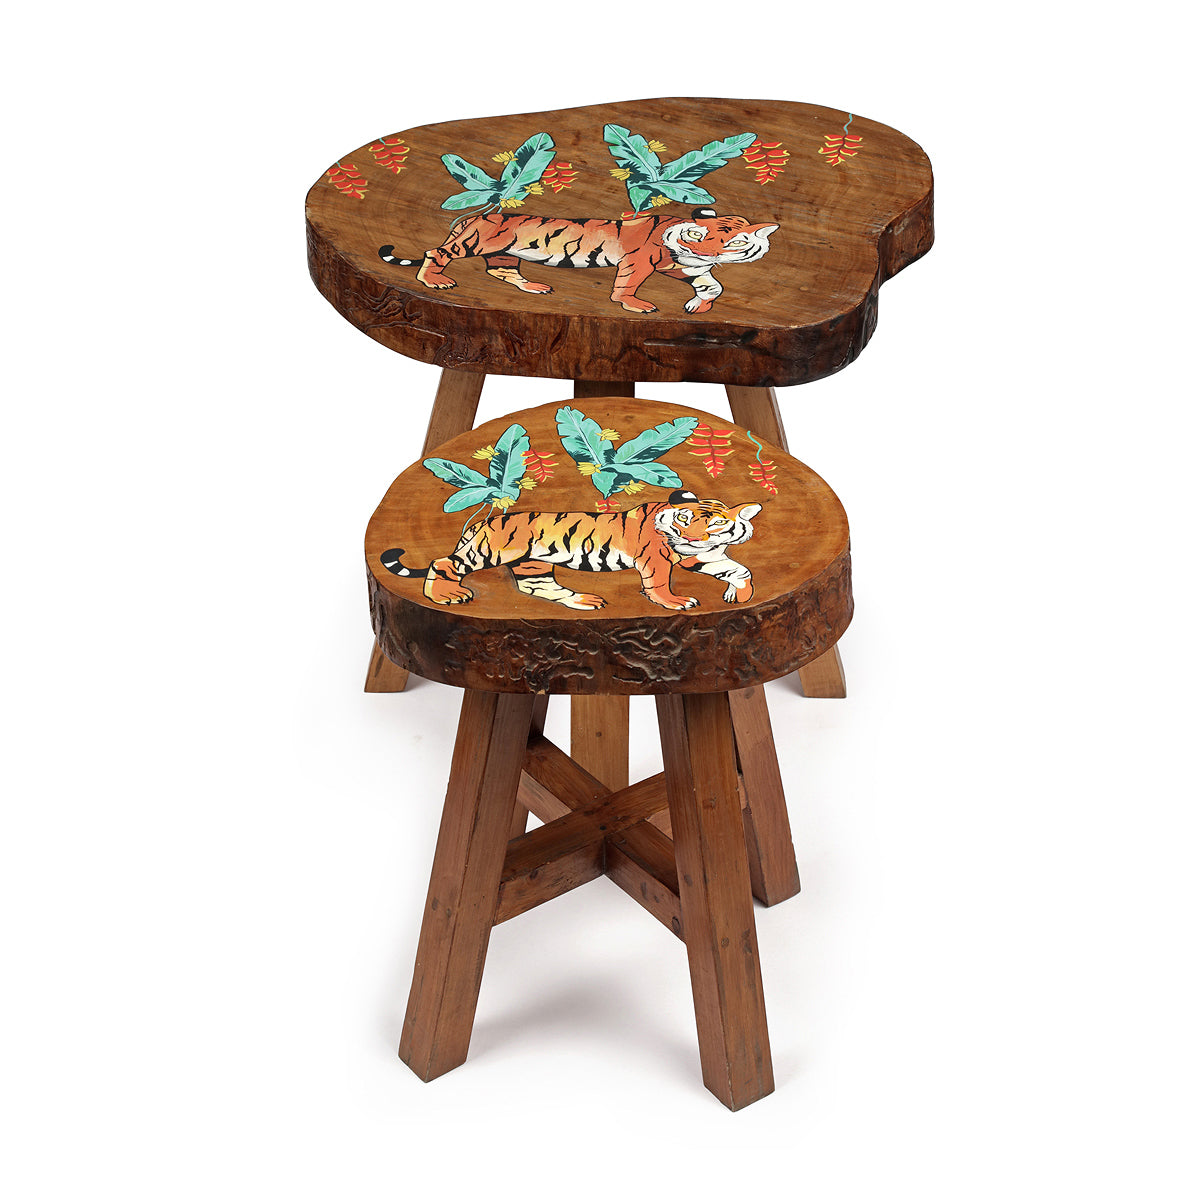 Untamed Hand Painted Log Tables